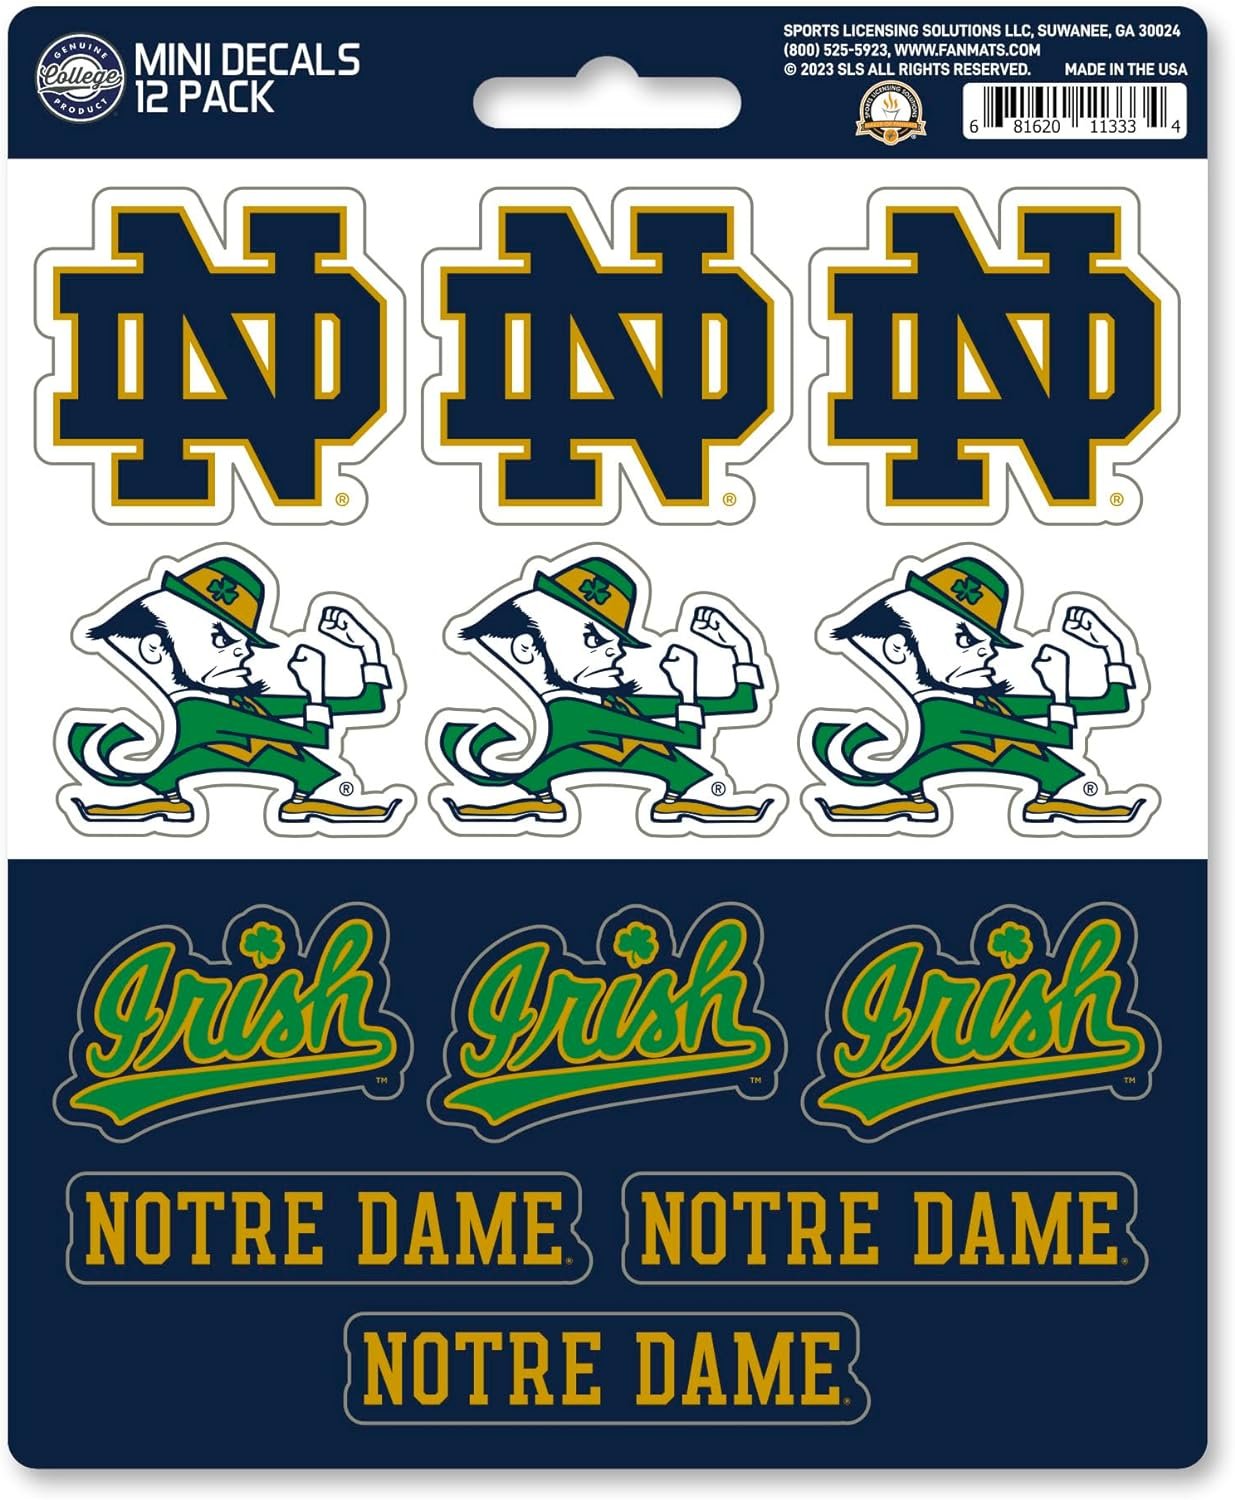 University of Notre Dame Fighting Irish 12-Piece Mini Decal Sticker Set, 5x6 Inch Sheet, Gift for football fans for any hard surfaces around home, automotive, personal items